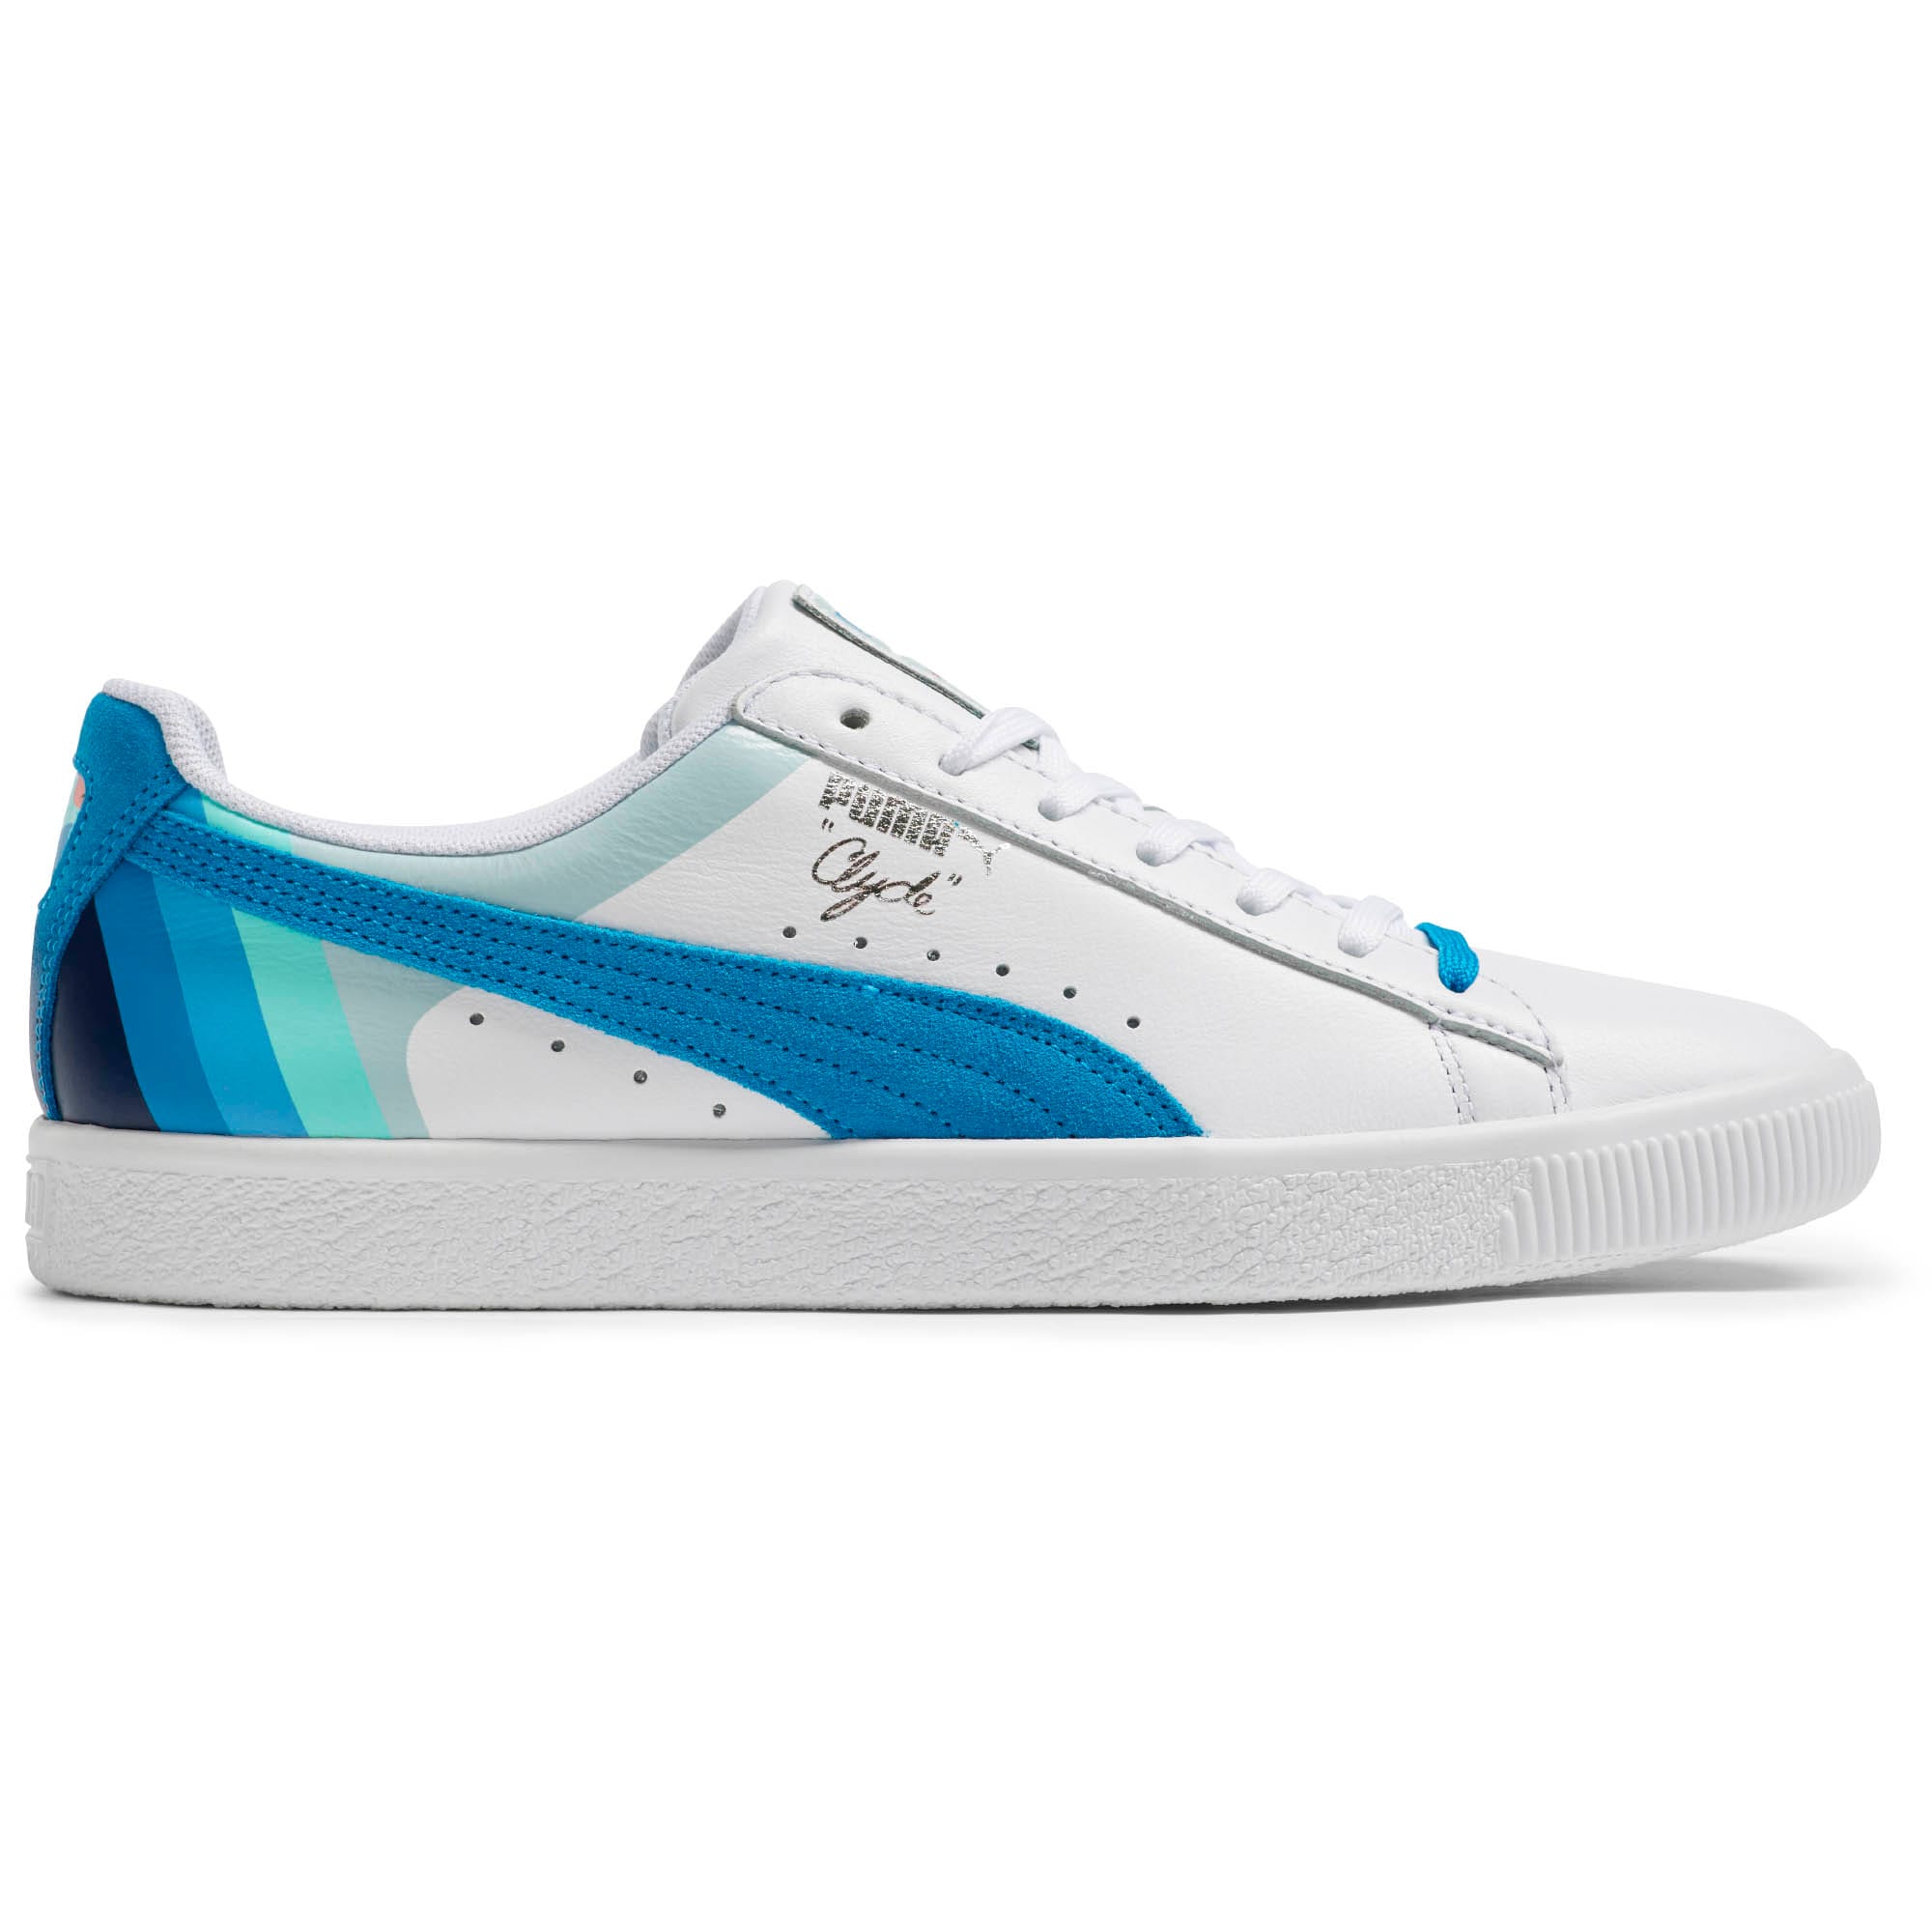 PUMA x Pink Dolphin Clyde Sneakers 